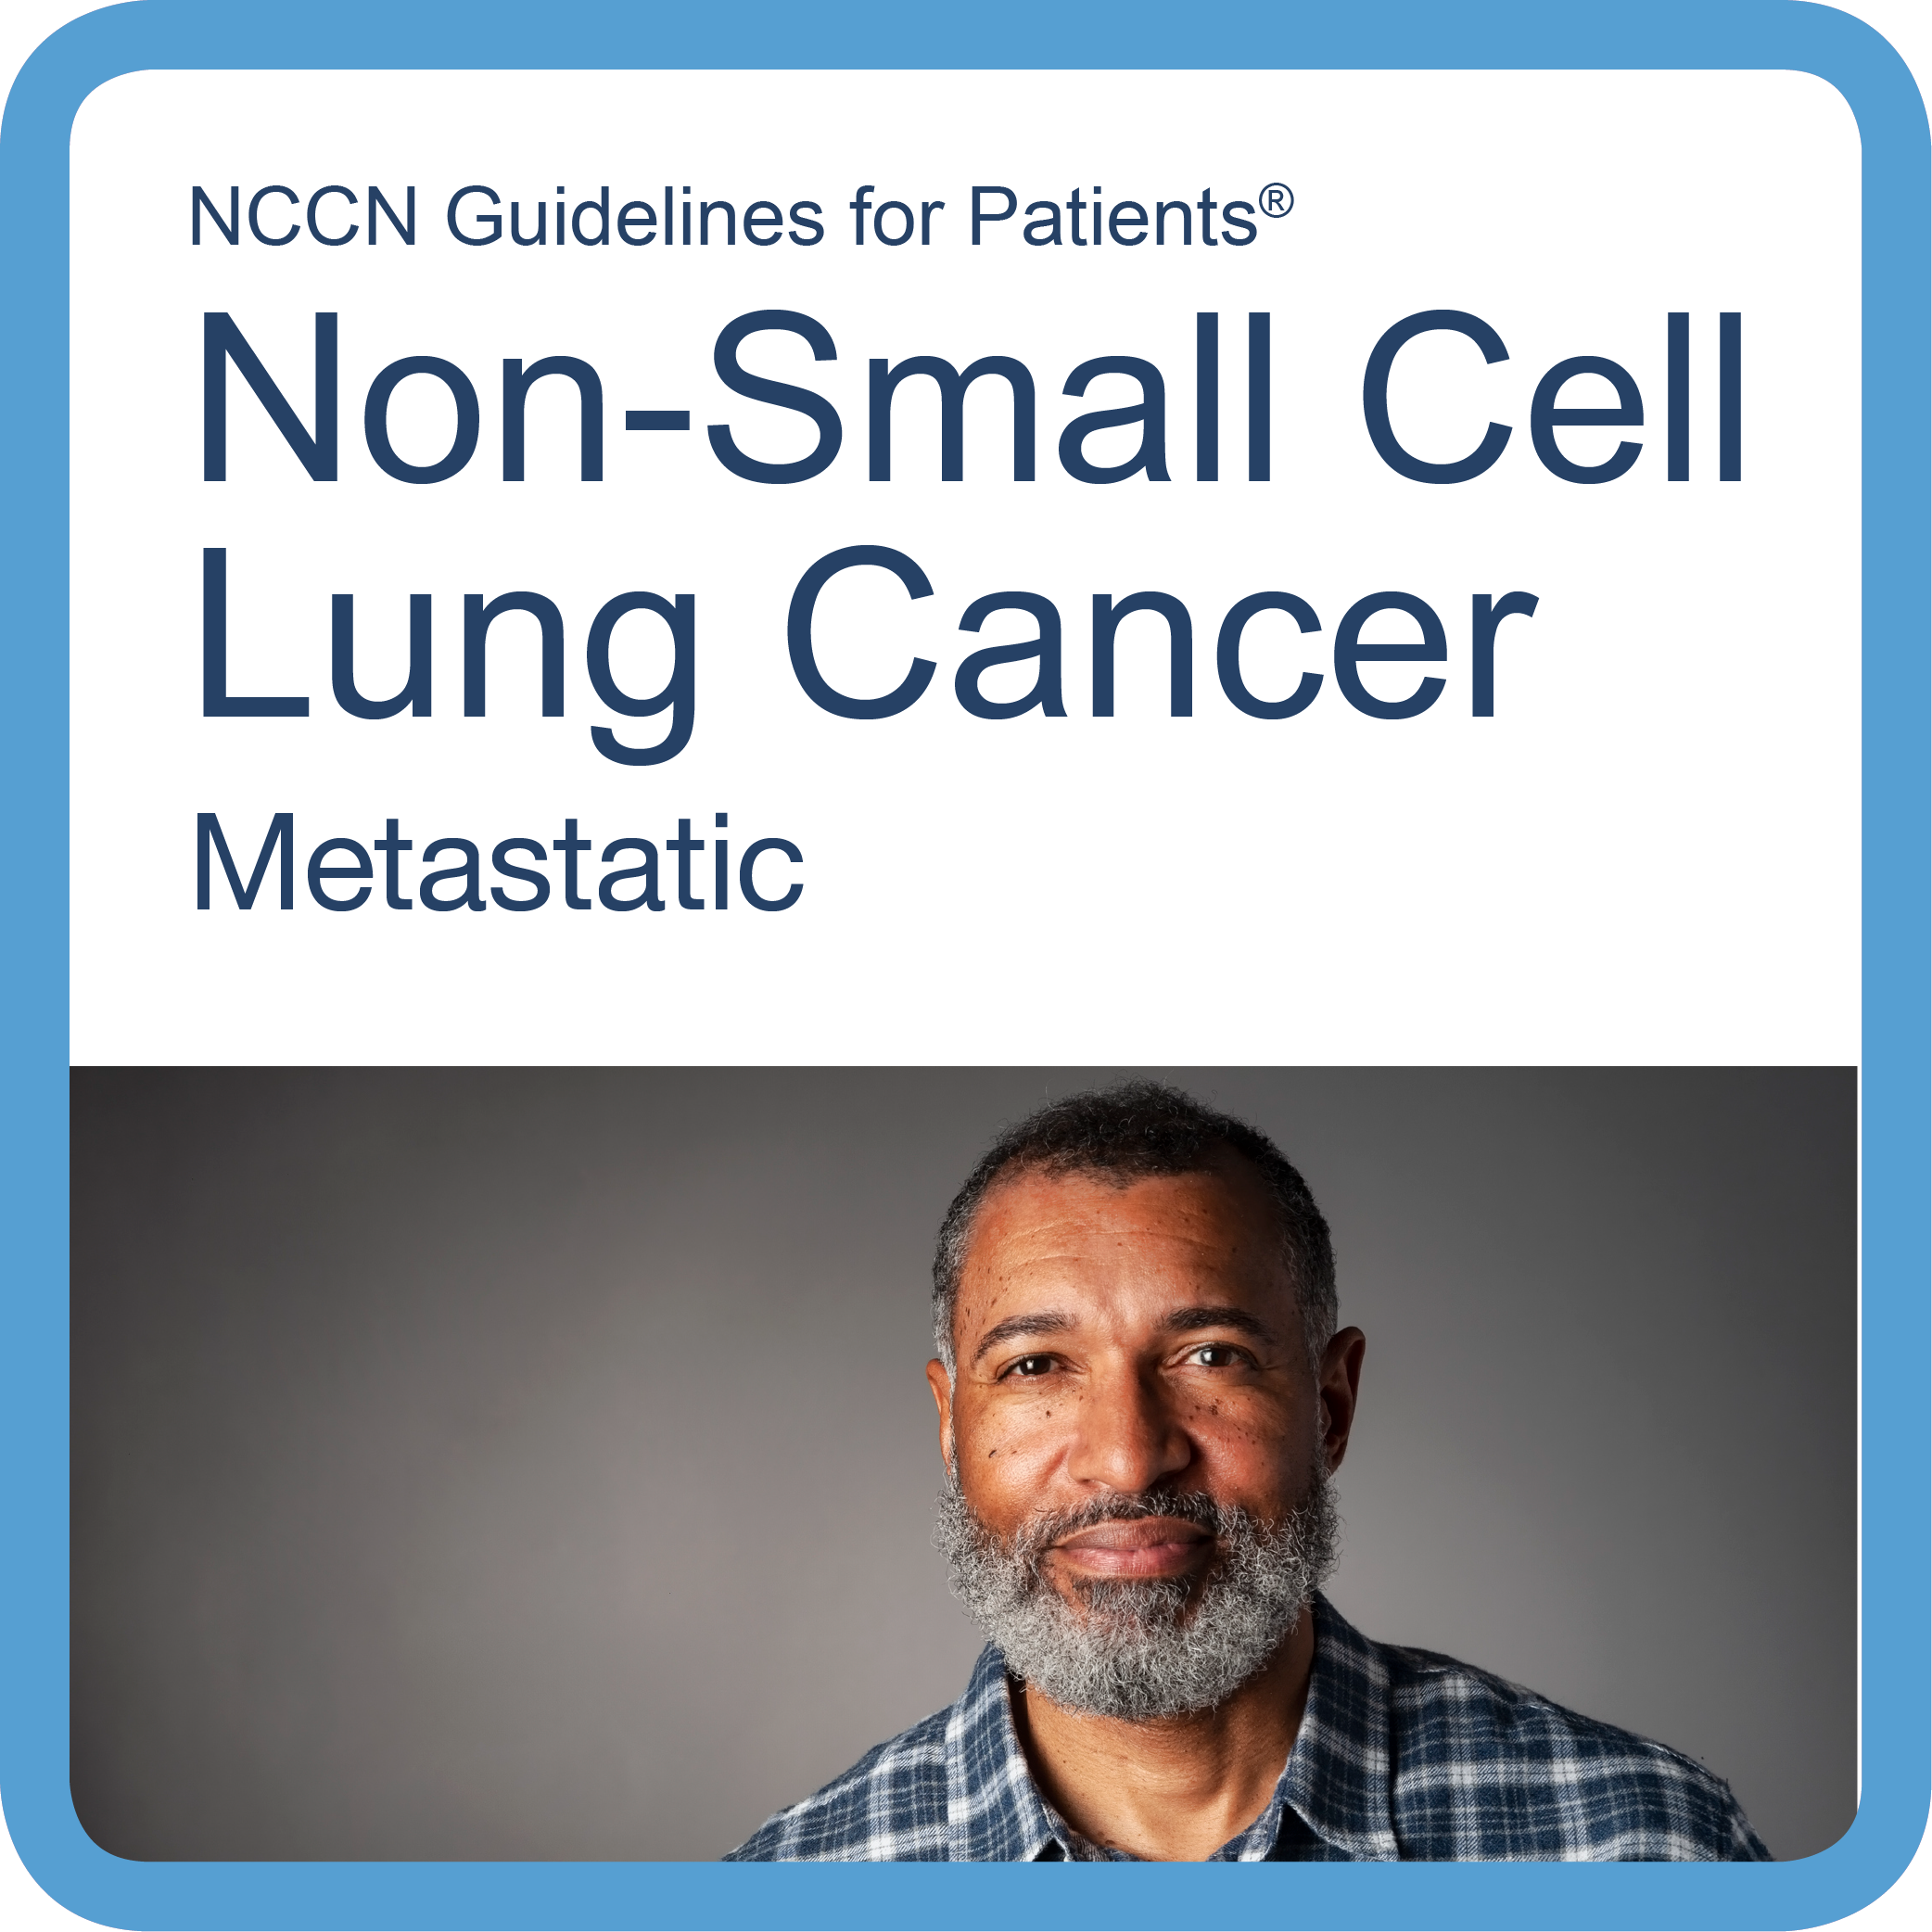 Patient Guidelines for NSCLC- Metastatic